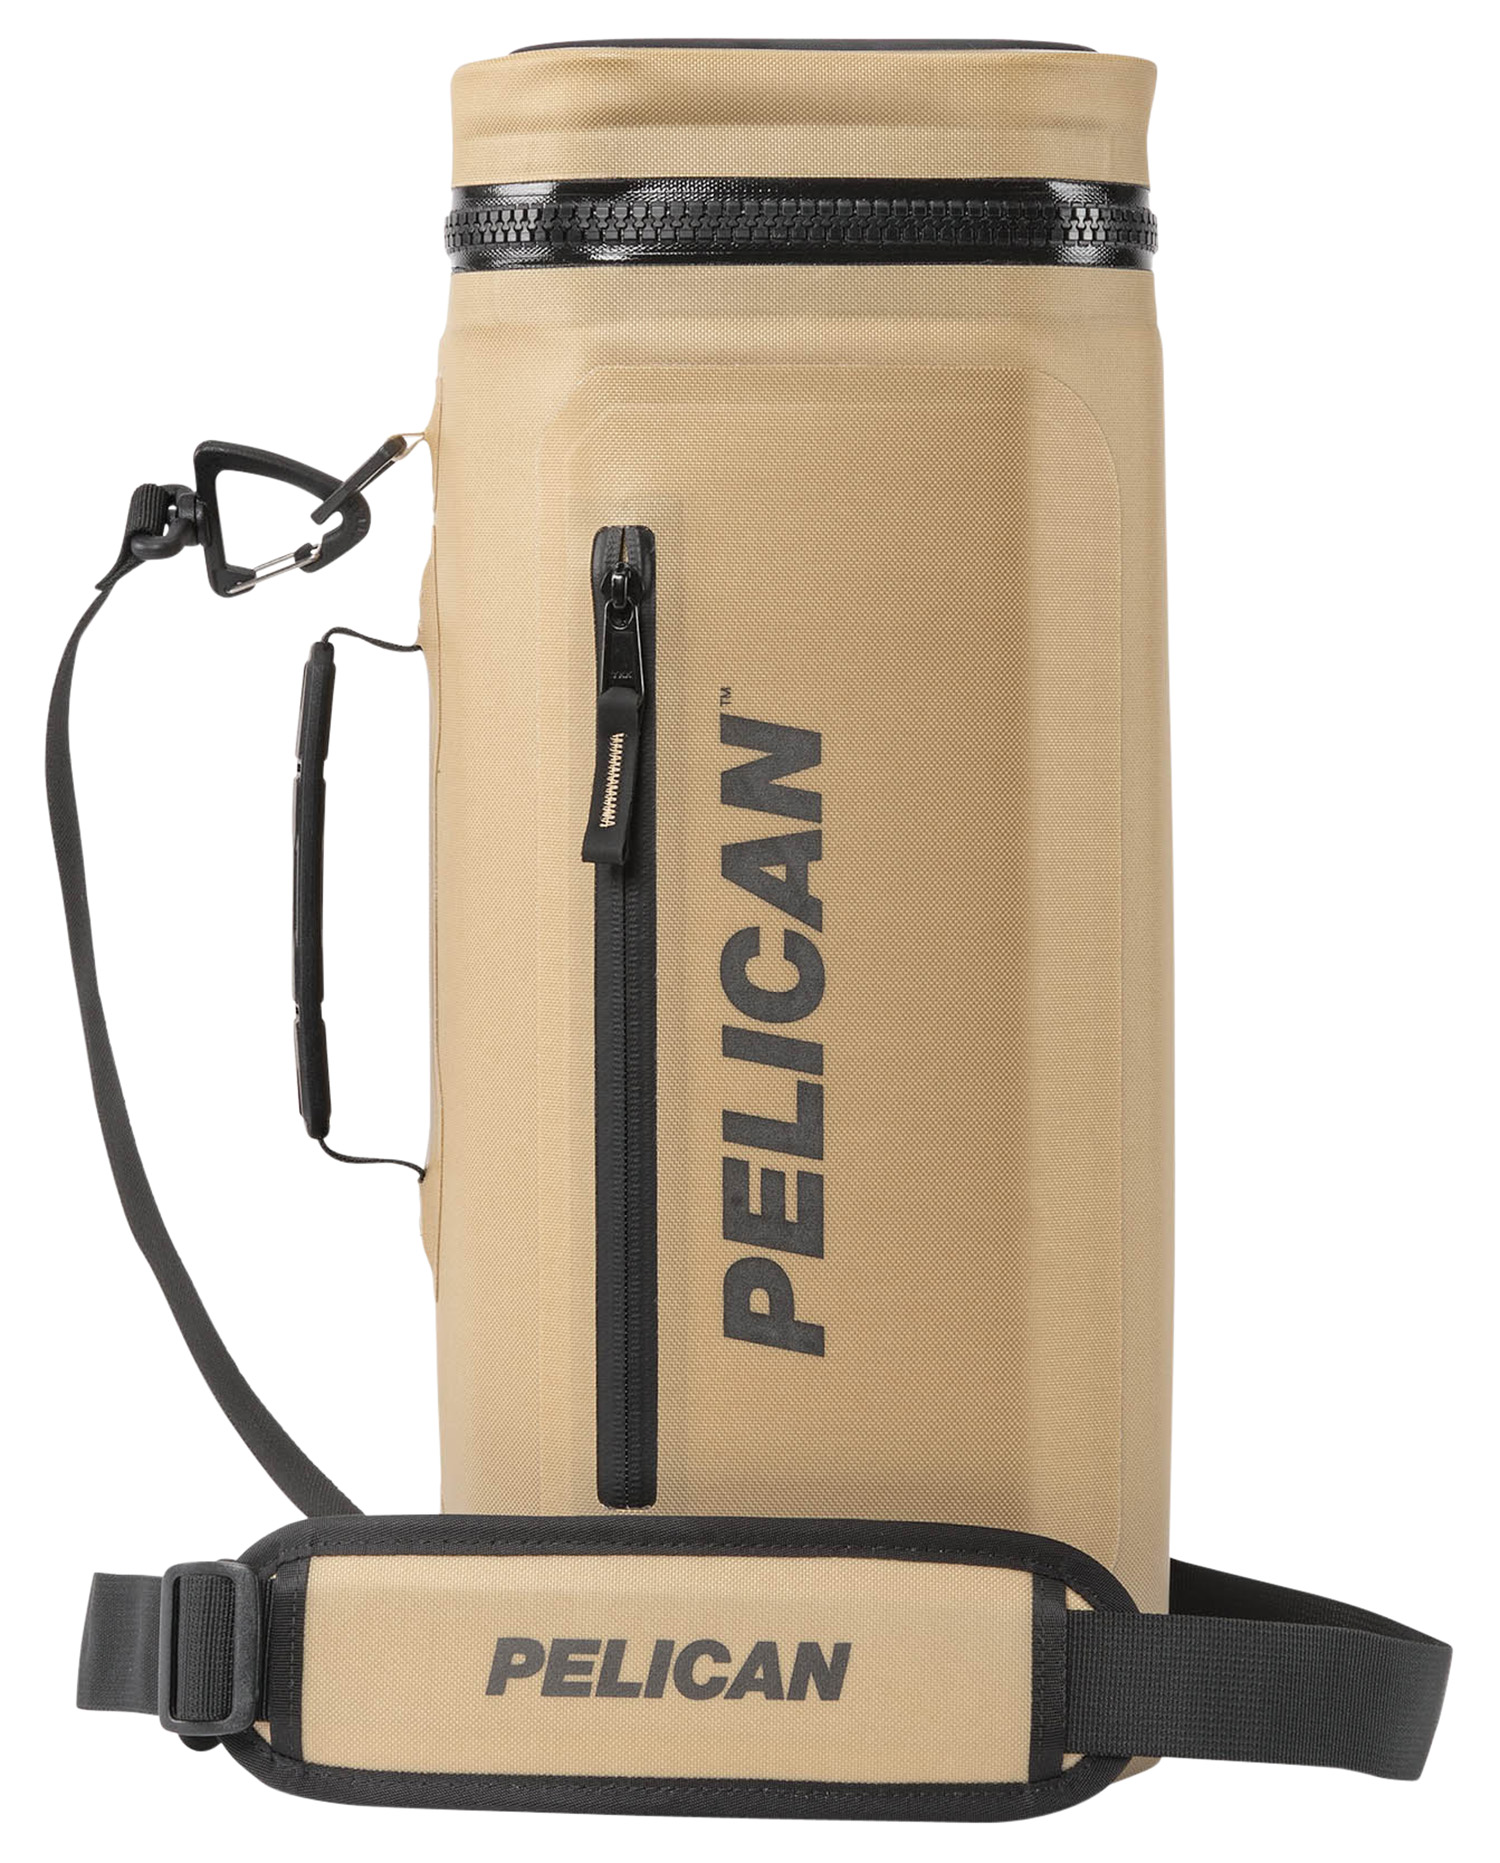 PELICAN SOFT COOLER SLING STYL COMPRESSION MOLDED COYOTE | 019428165499